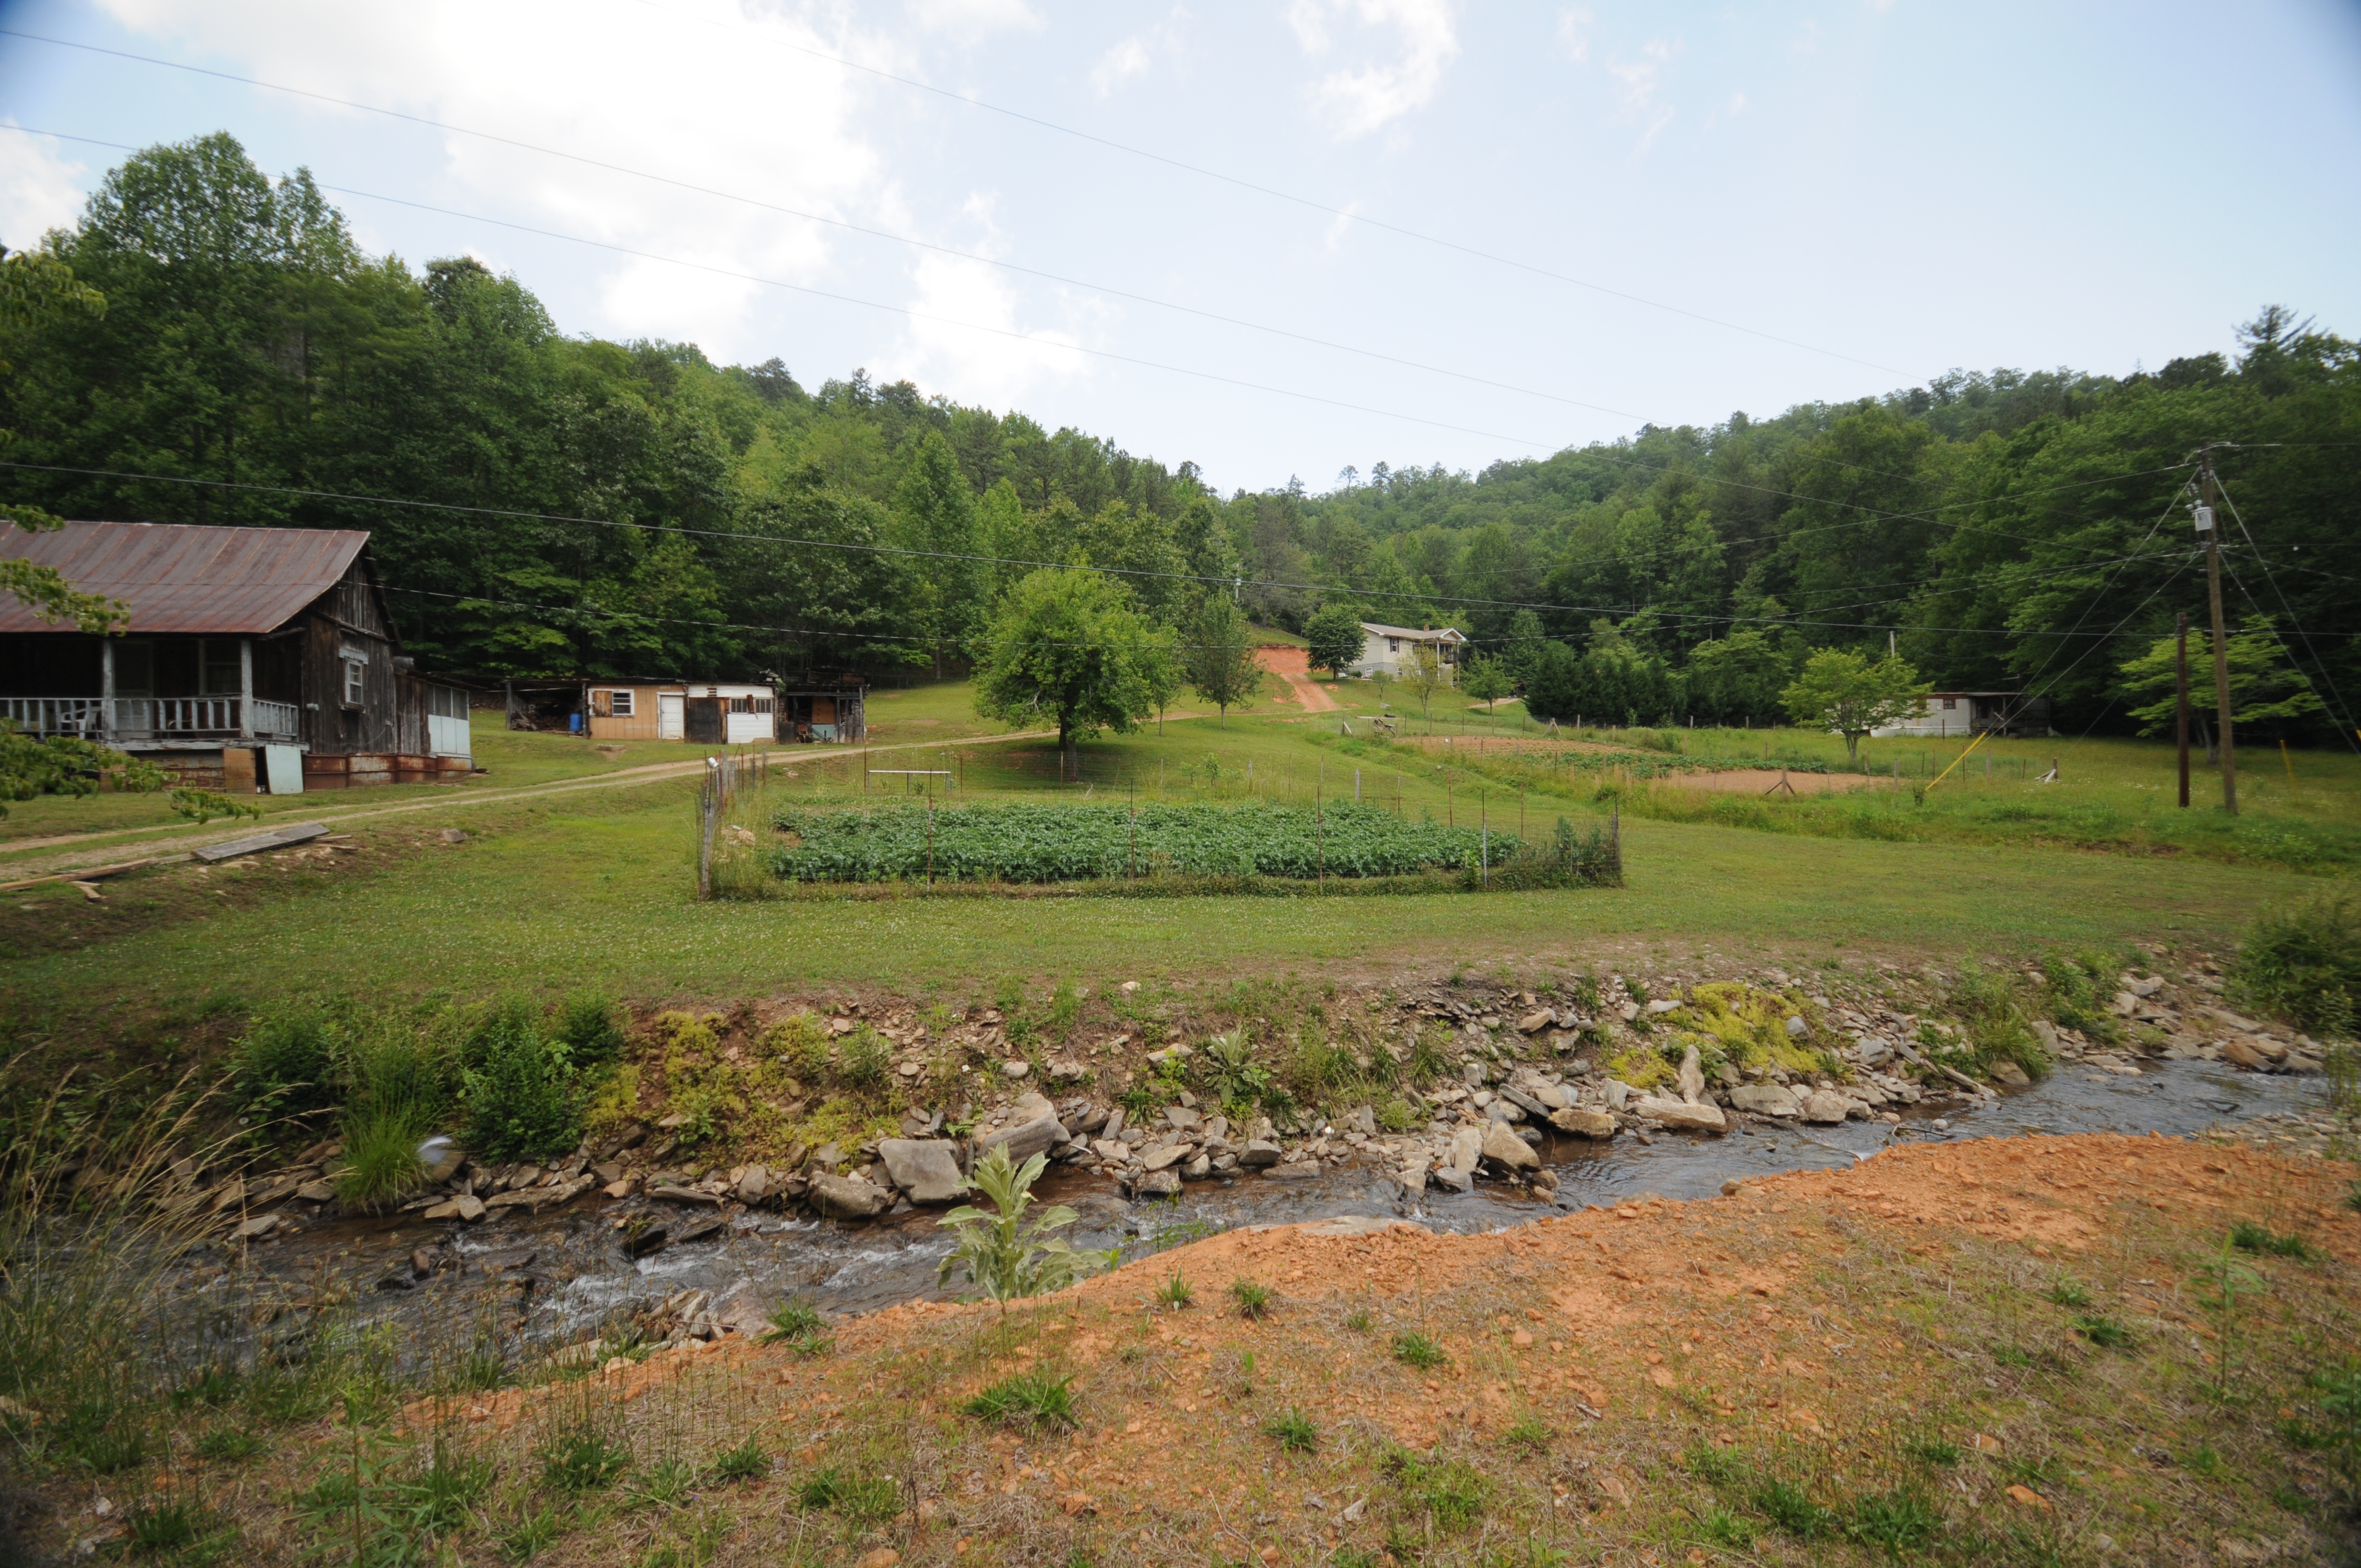 Development restrictions to protect water quality in the Ivy River Watershed near the Coweeta LTER have negatively impacted property values amongst residents, though the nearby city of Asheville, which benefits from better water quality because of the restrictions, has seen a rise in property values